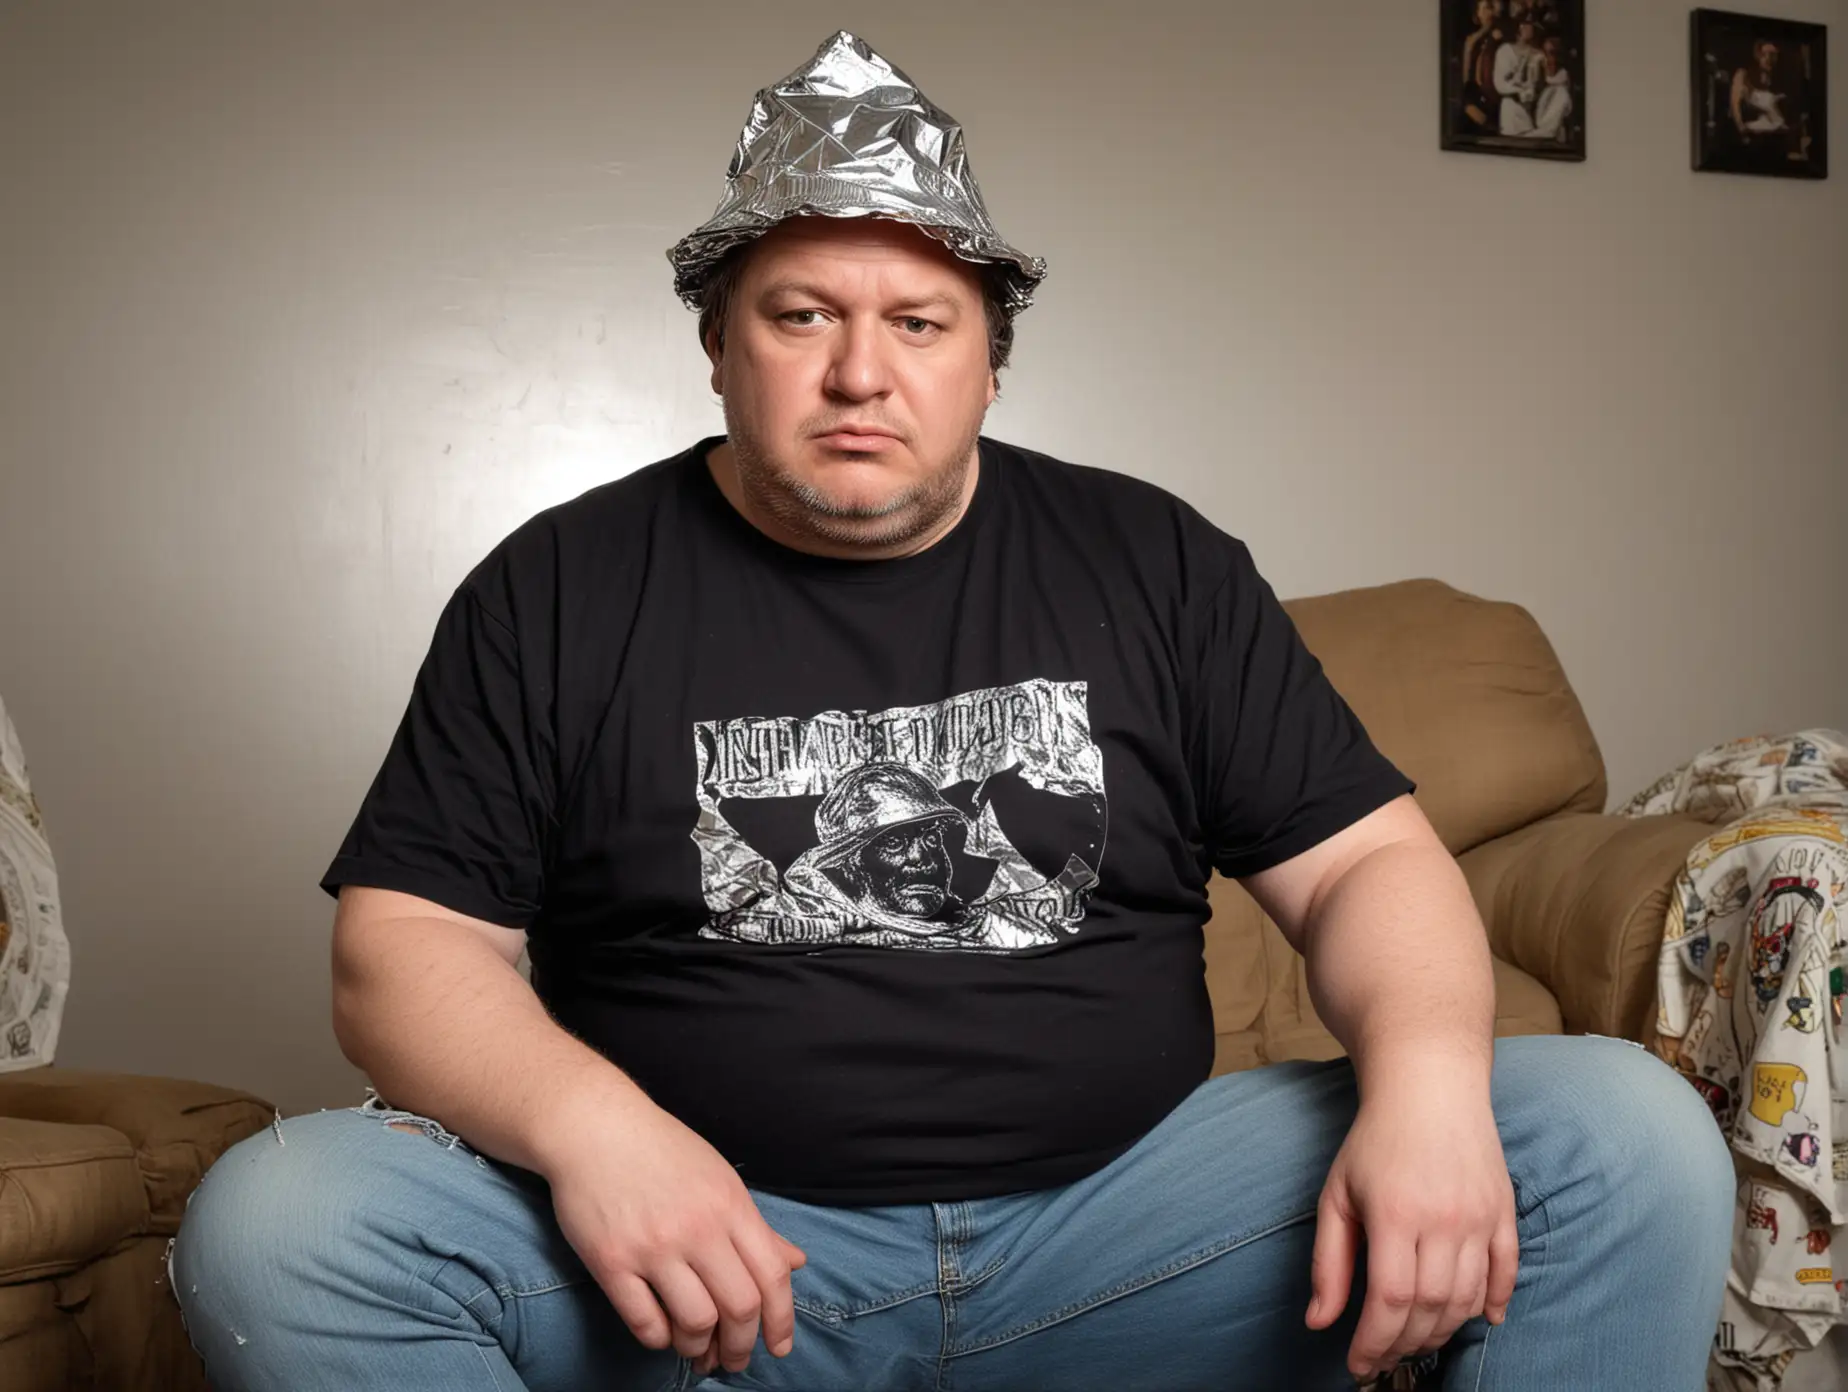 A chubby 50 year old male conspiracy theorist wearing a black t-shirt, jeans and a tin foil hat. He is sitting in his messy home by the computer.